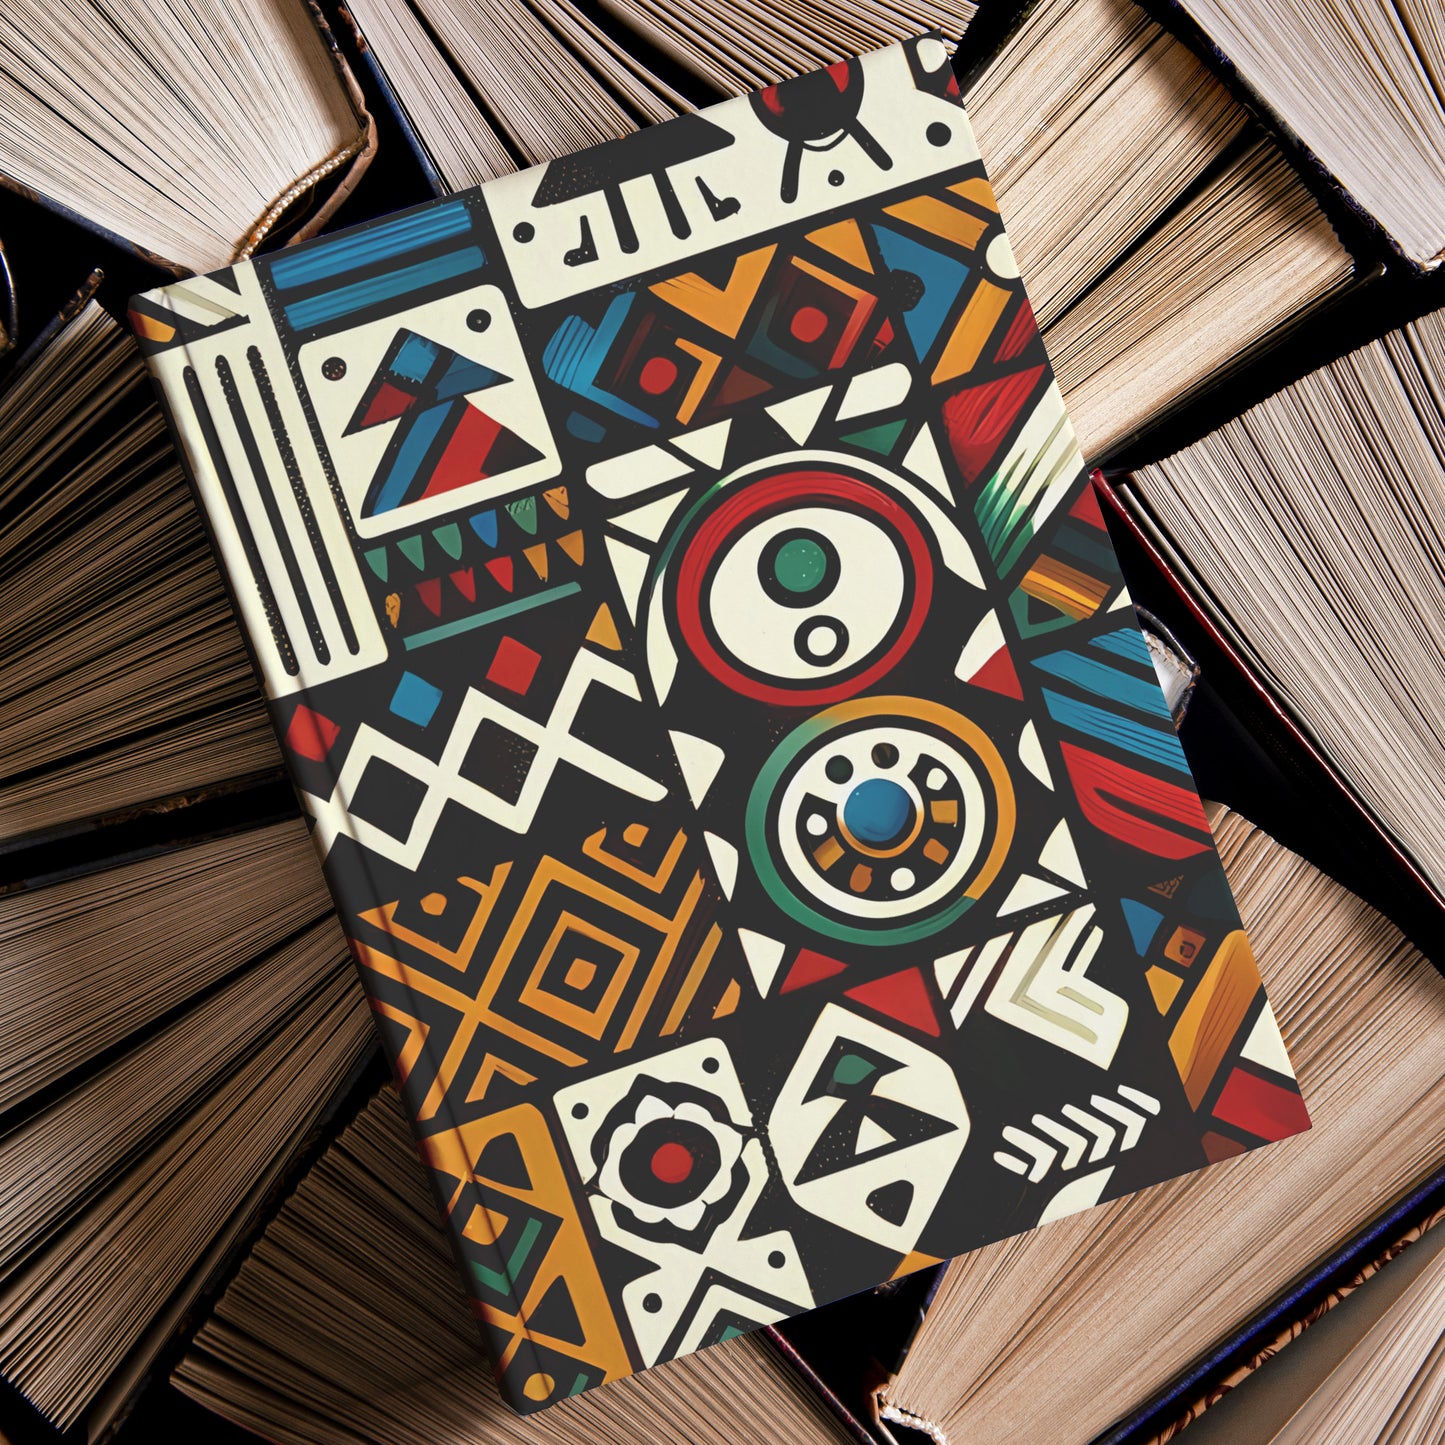 Vibrant Afrocentric Geometric Pattern Journal - Hardcover